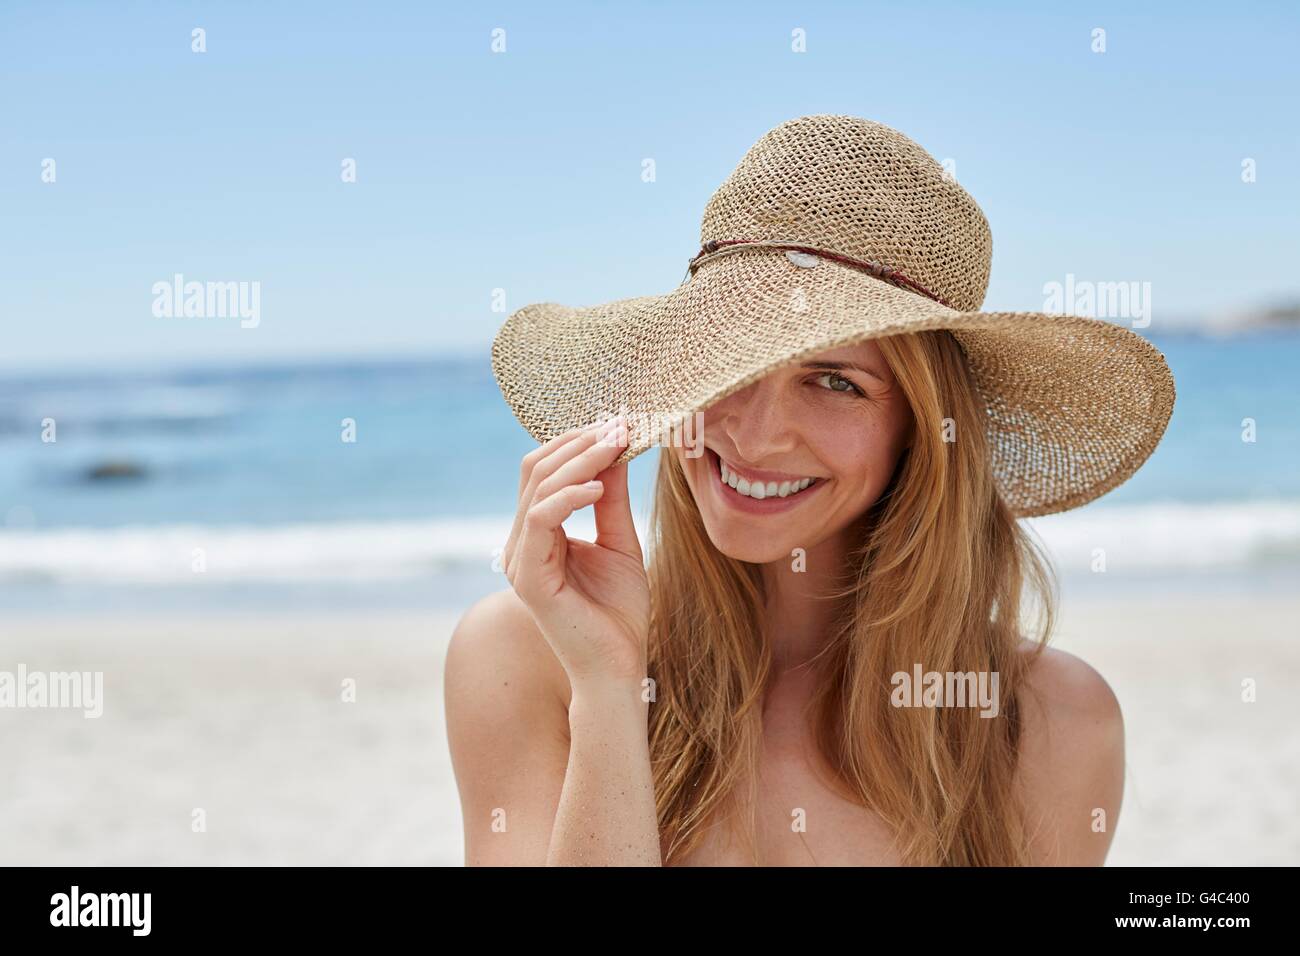 MODEL RELEASED. Young woman wearing a sunhat, portrait. Stock Photo